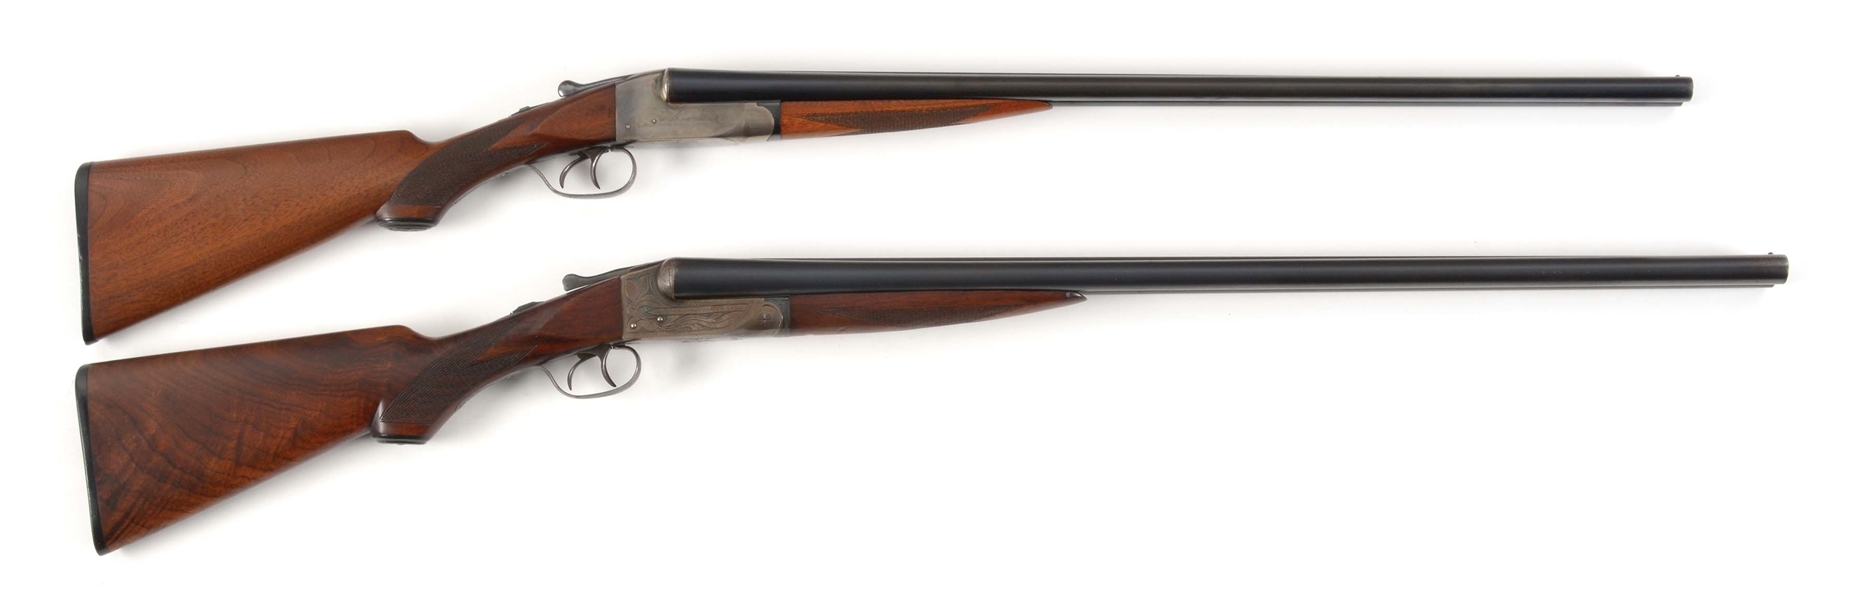 (C) LOT OF TWO: TWO ITHACA FLUES GRADE 1 SIDE BY SIDE SHOTGUNS.